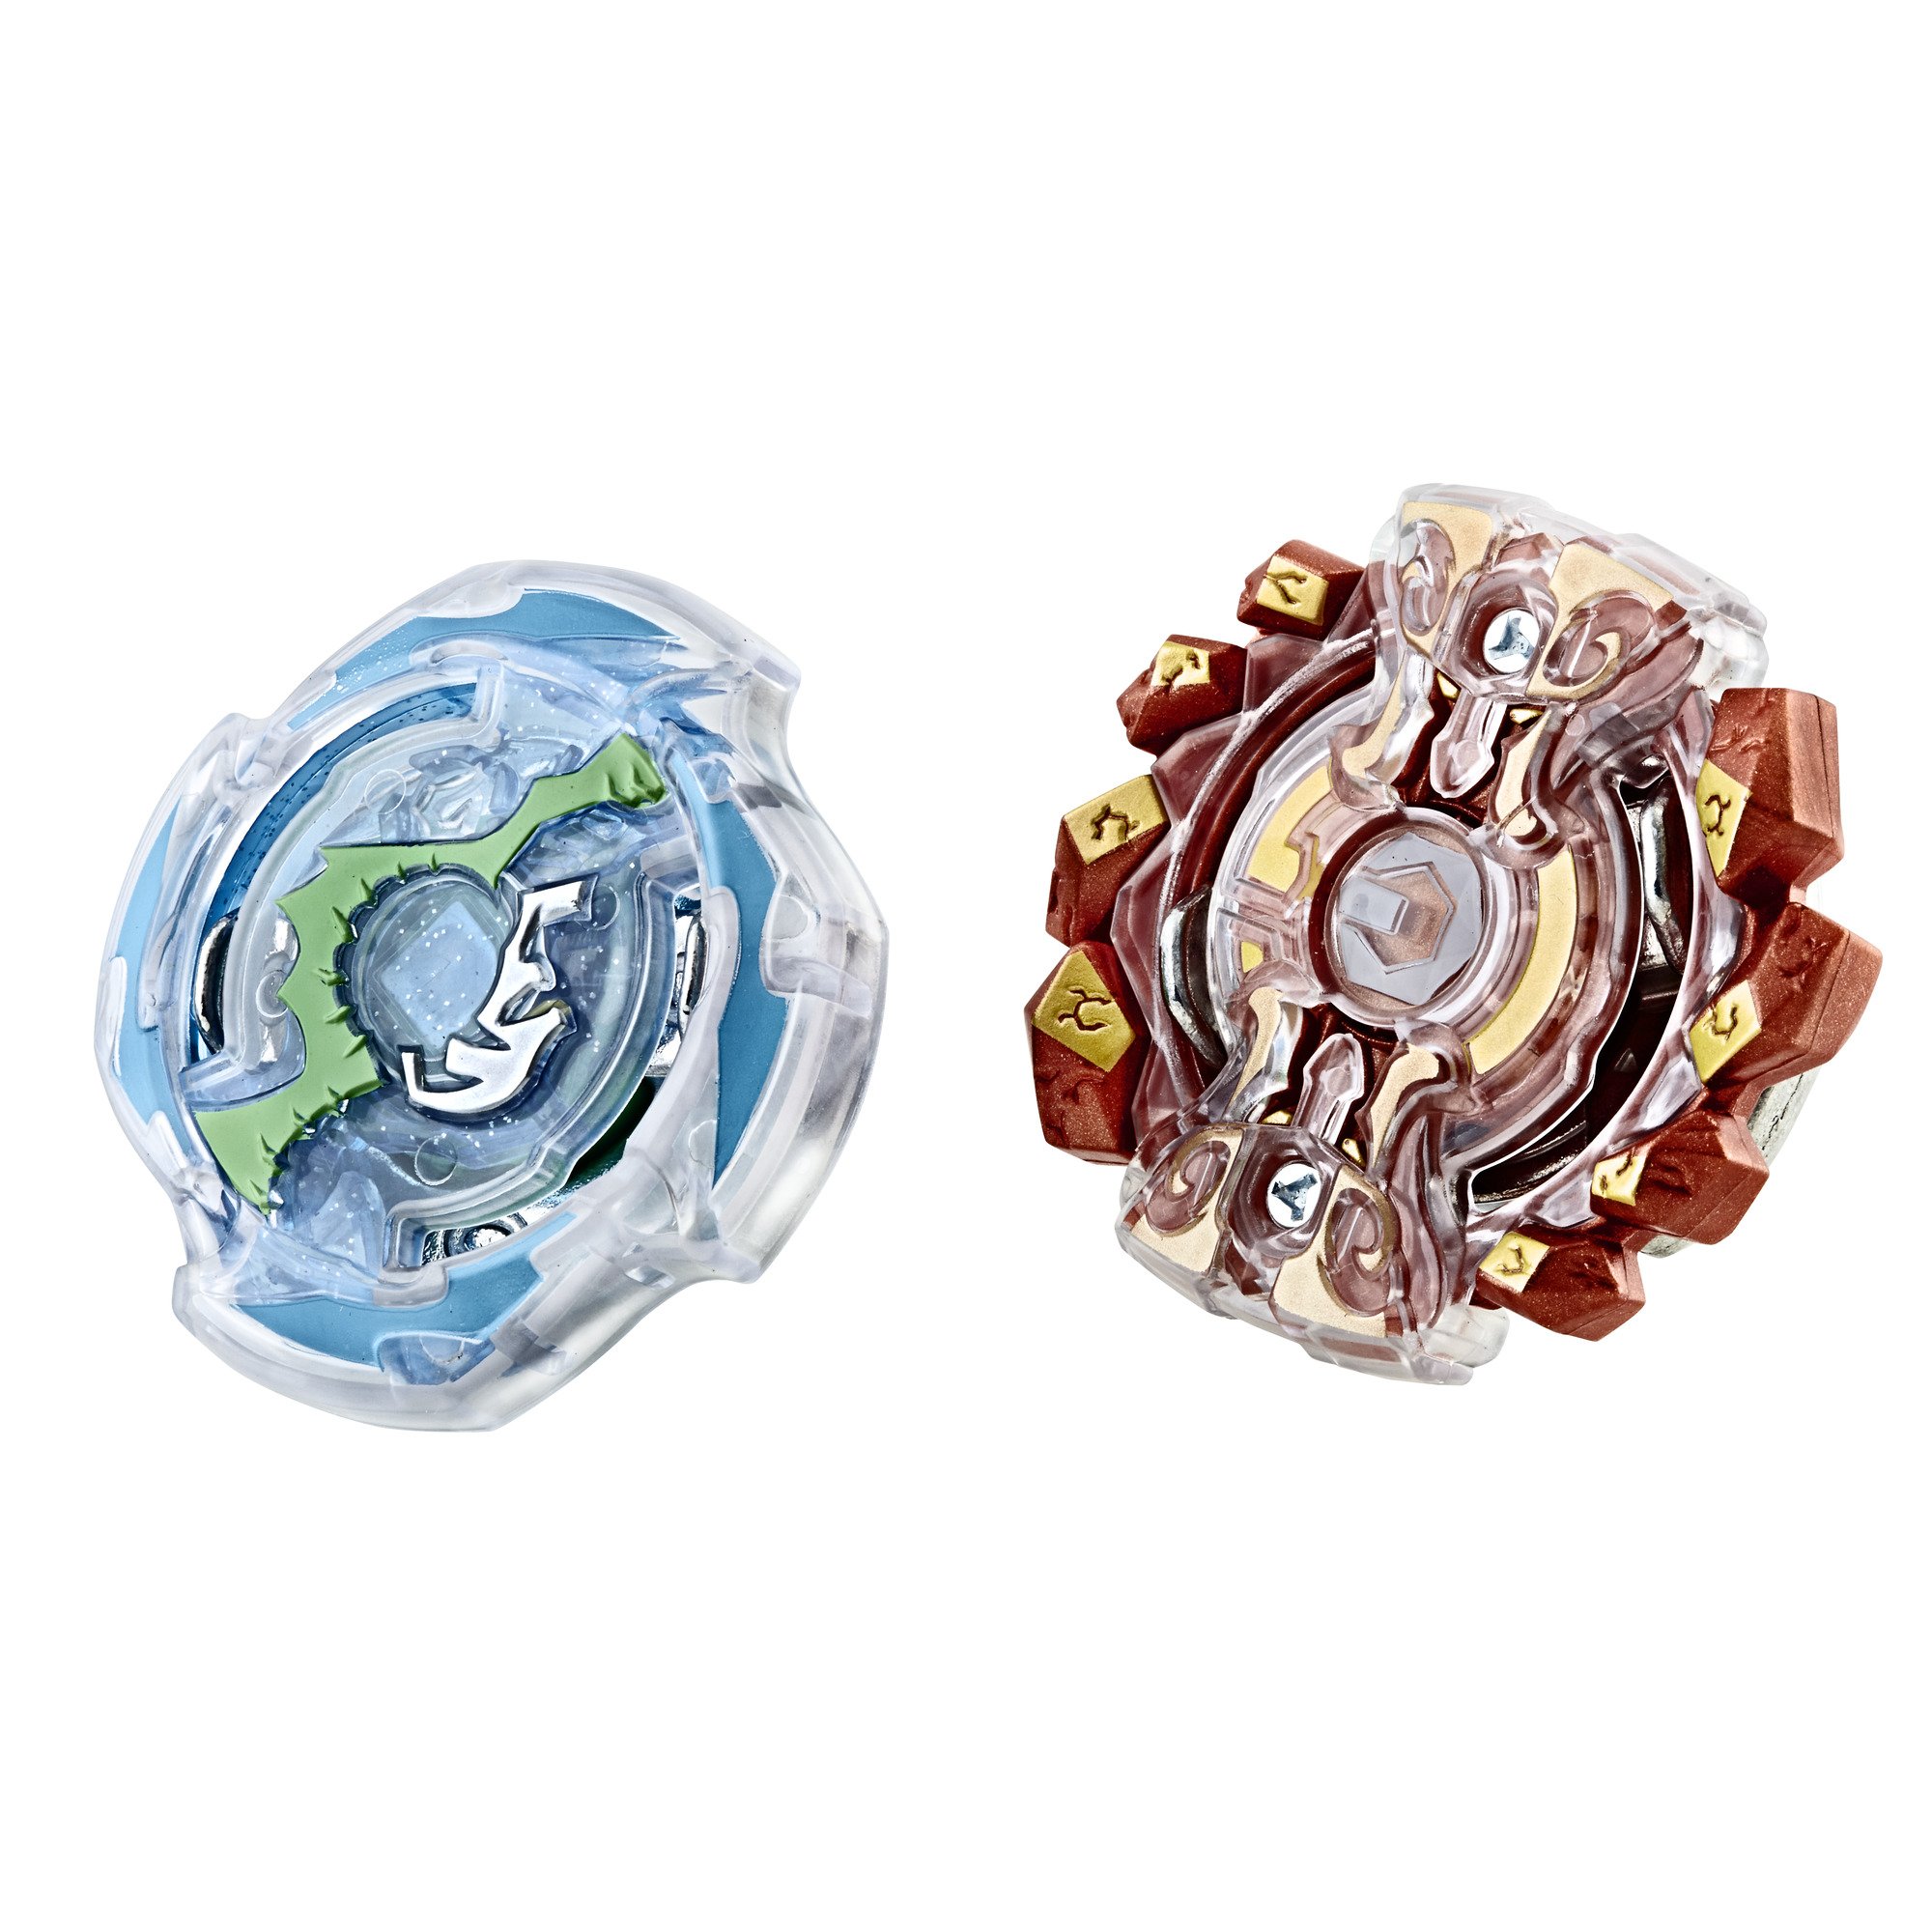 Beyblade D1 & G2 Action Figure